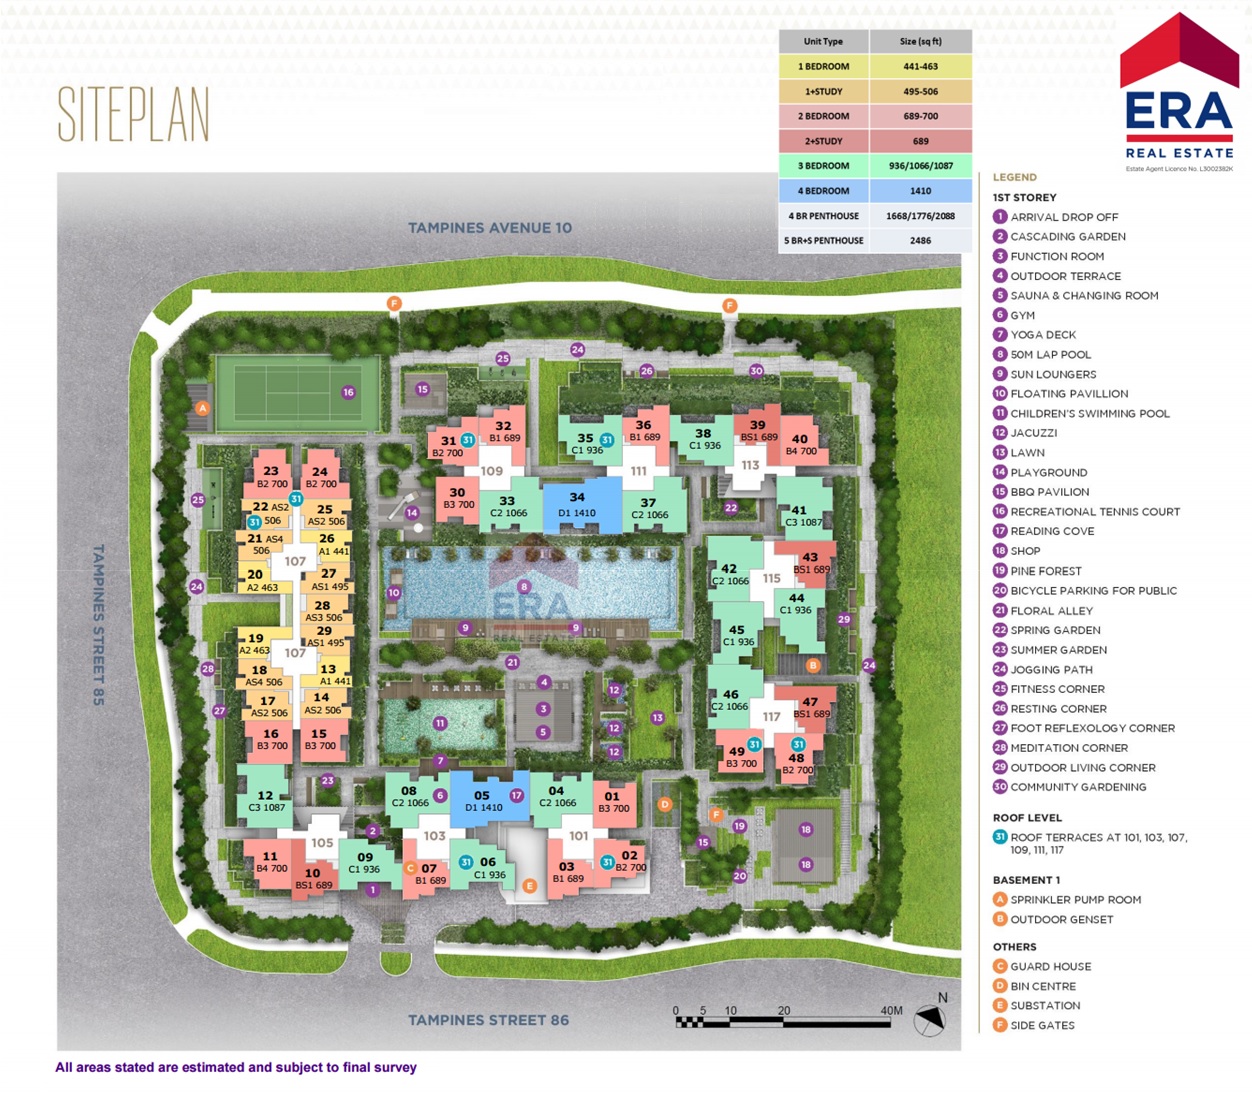 The Alps Residences site map